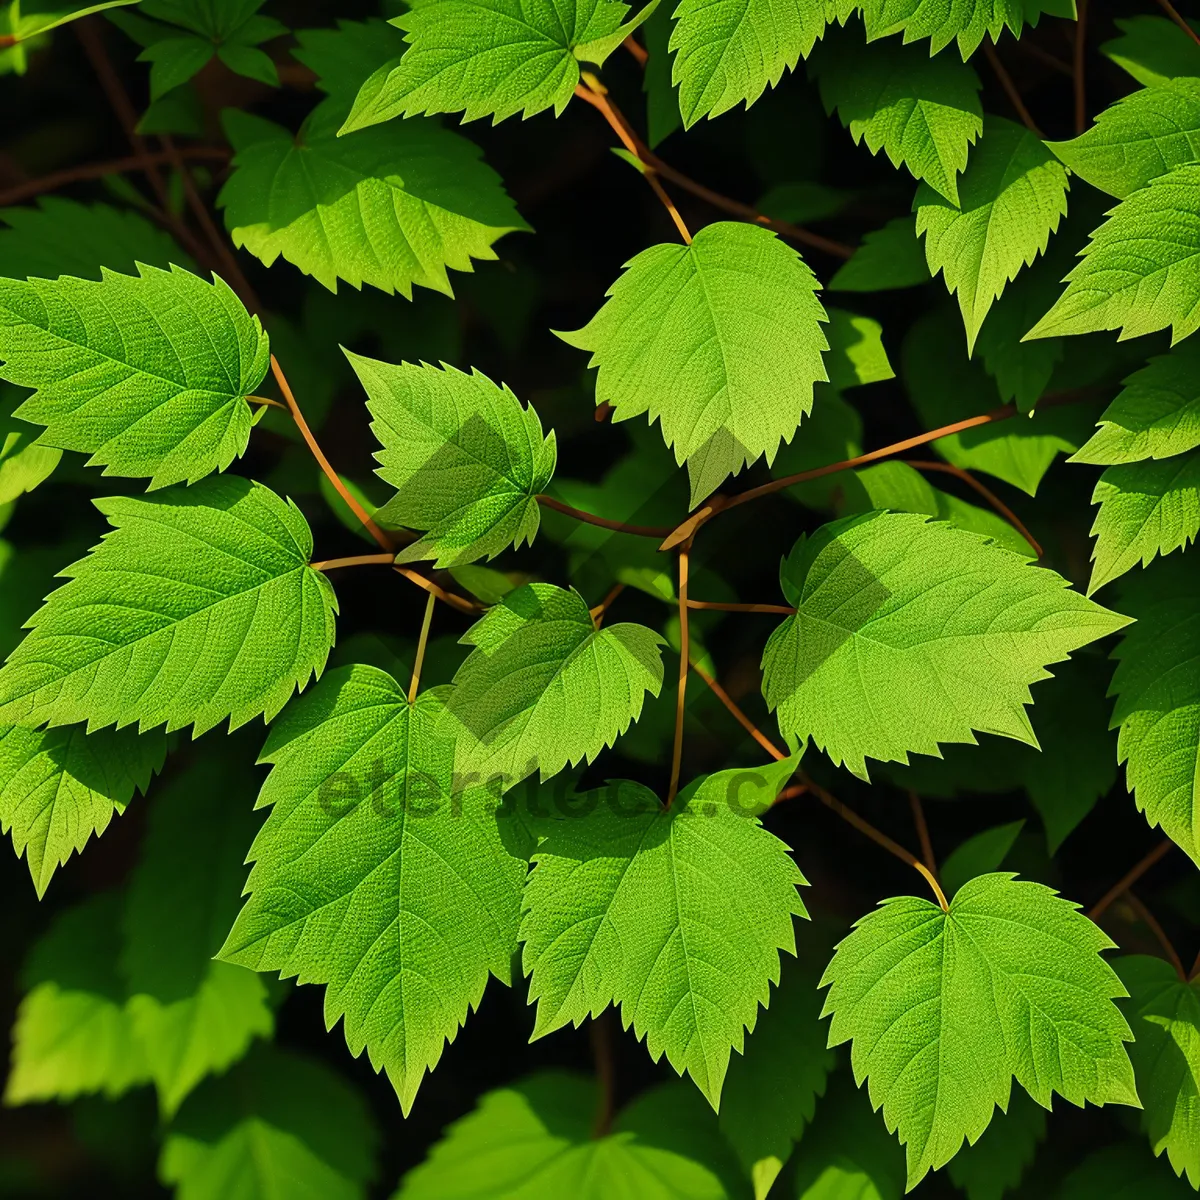 Picture of Sunny Elm Tree with Lush Foliage